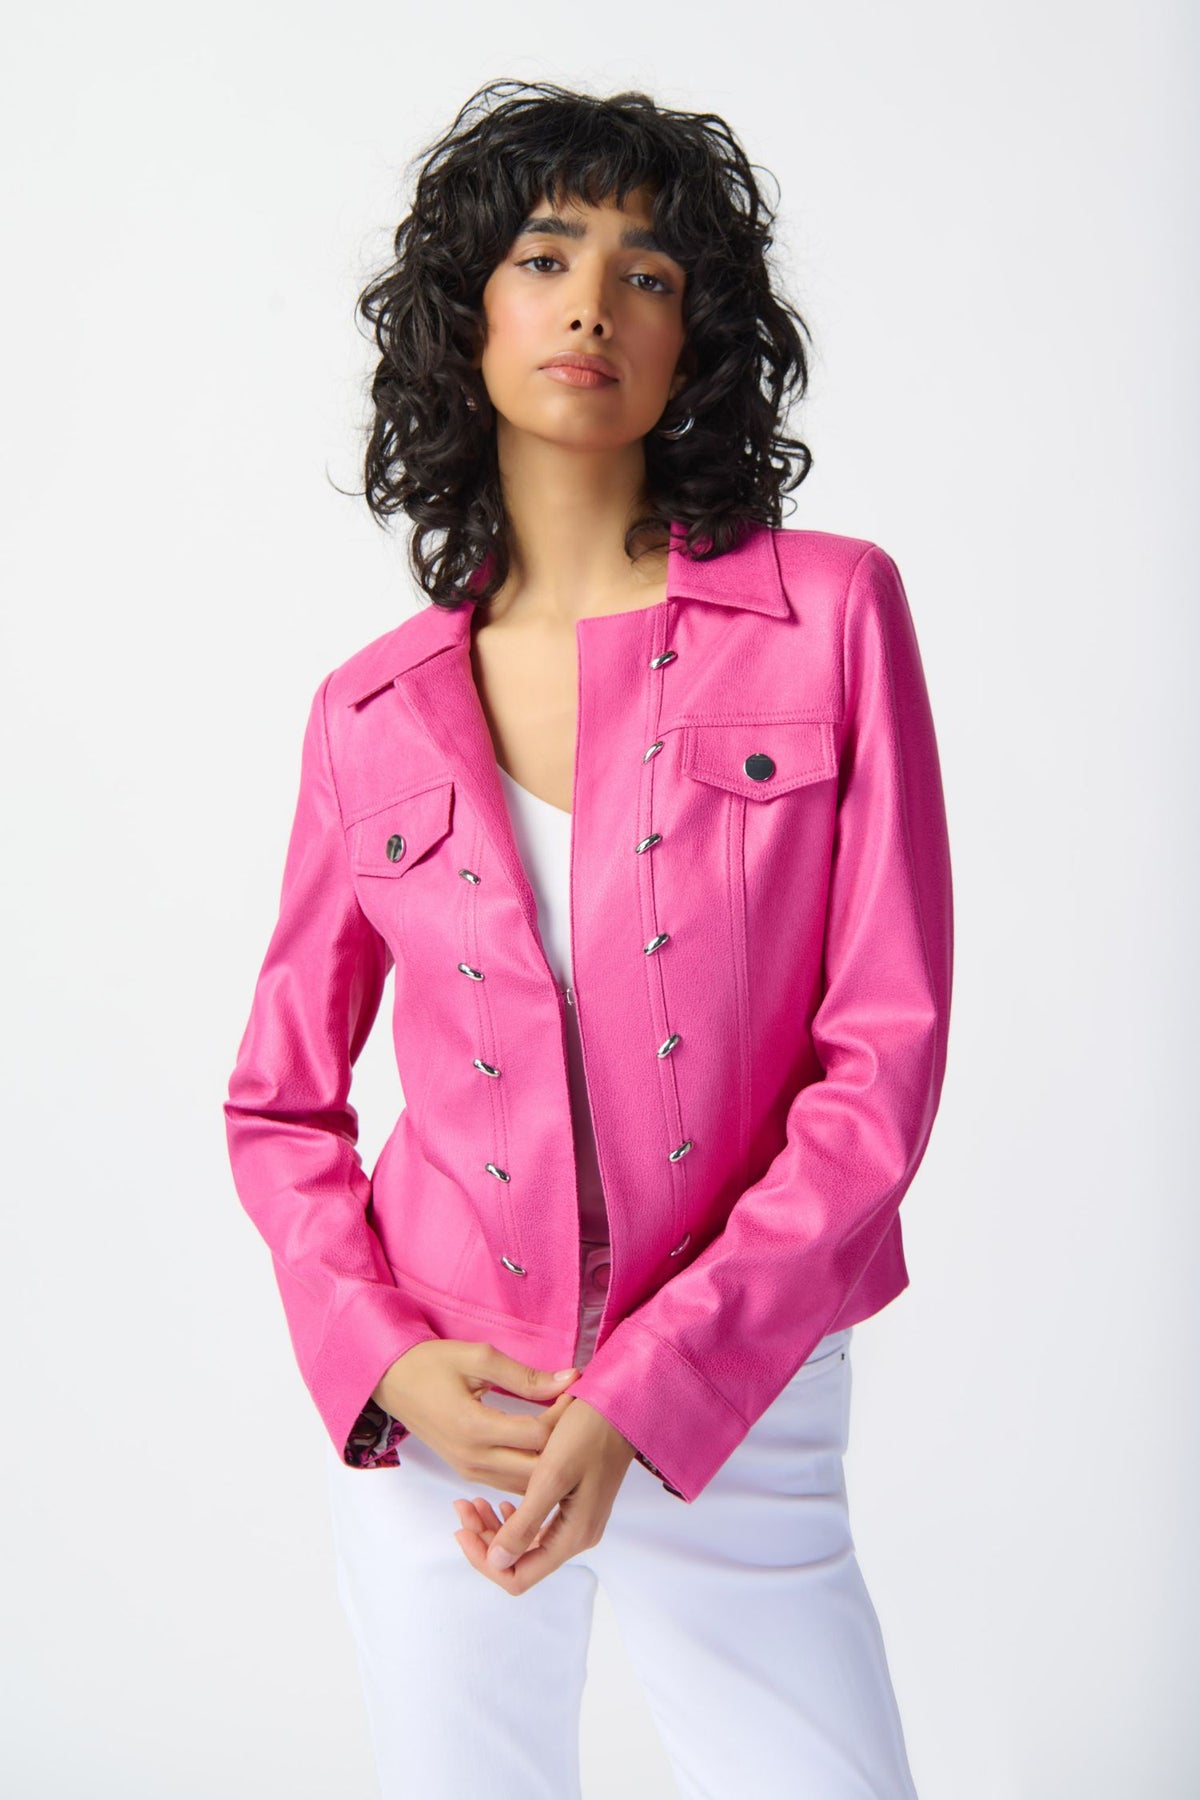 Joseph Ribkoff Foiled Suede Jacket With Metal Trims - Style 241911, front2, pink